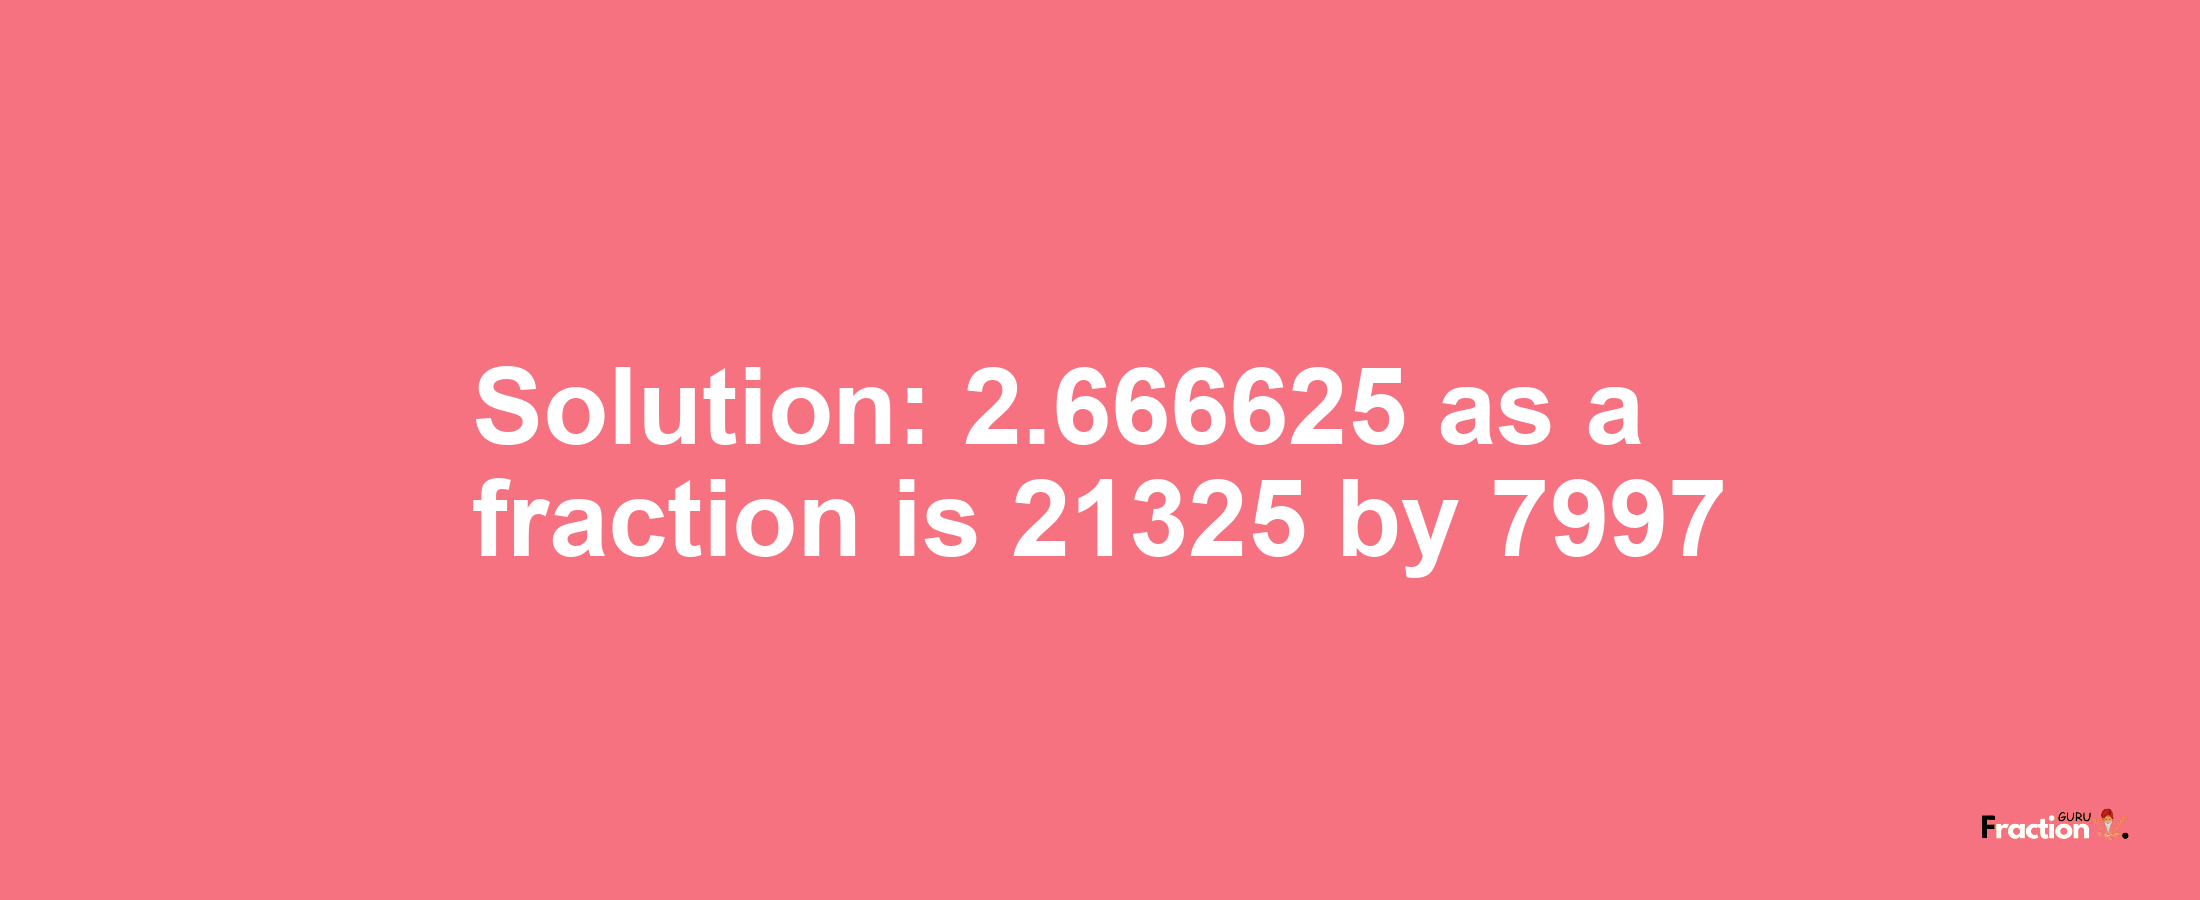 Solution:2.666625 as a fraction is 21325/7997